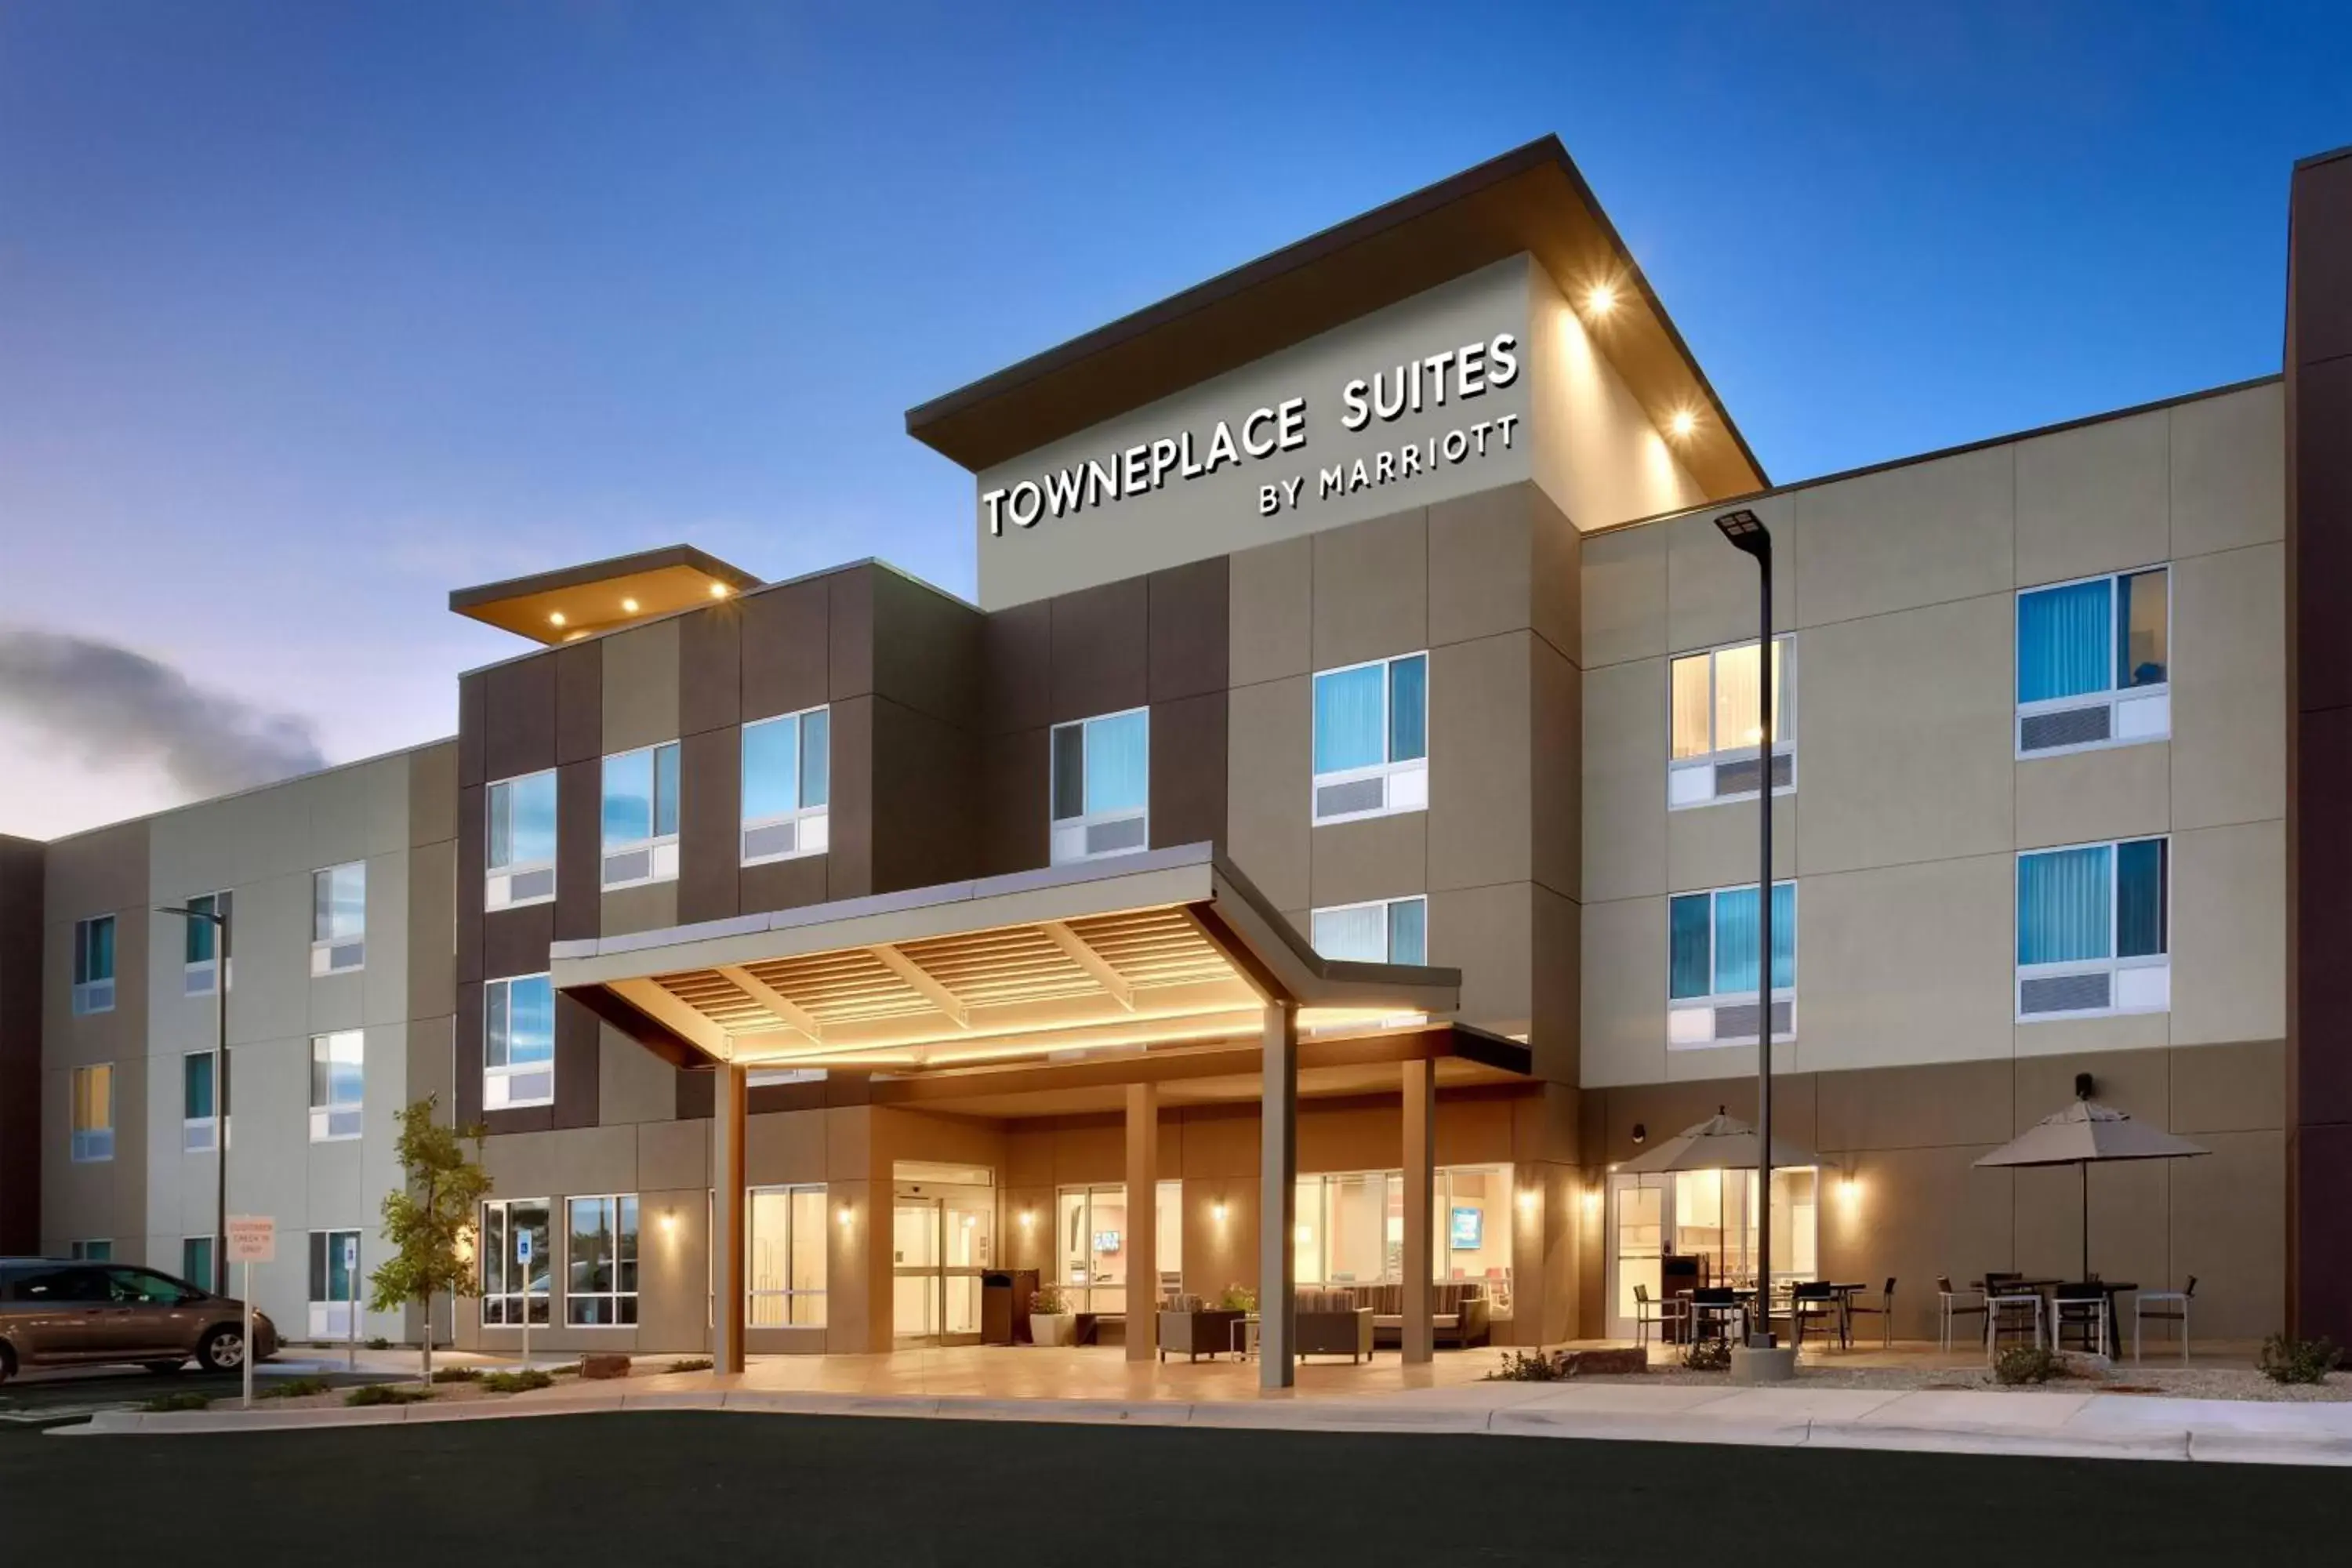 Property Building in TownePlace Suites by Marriott Clovis